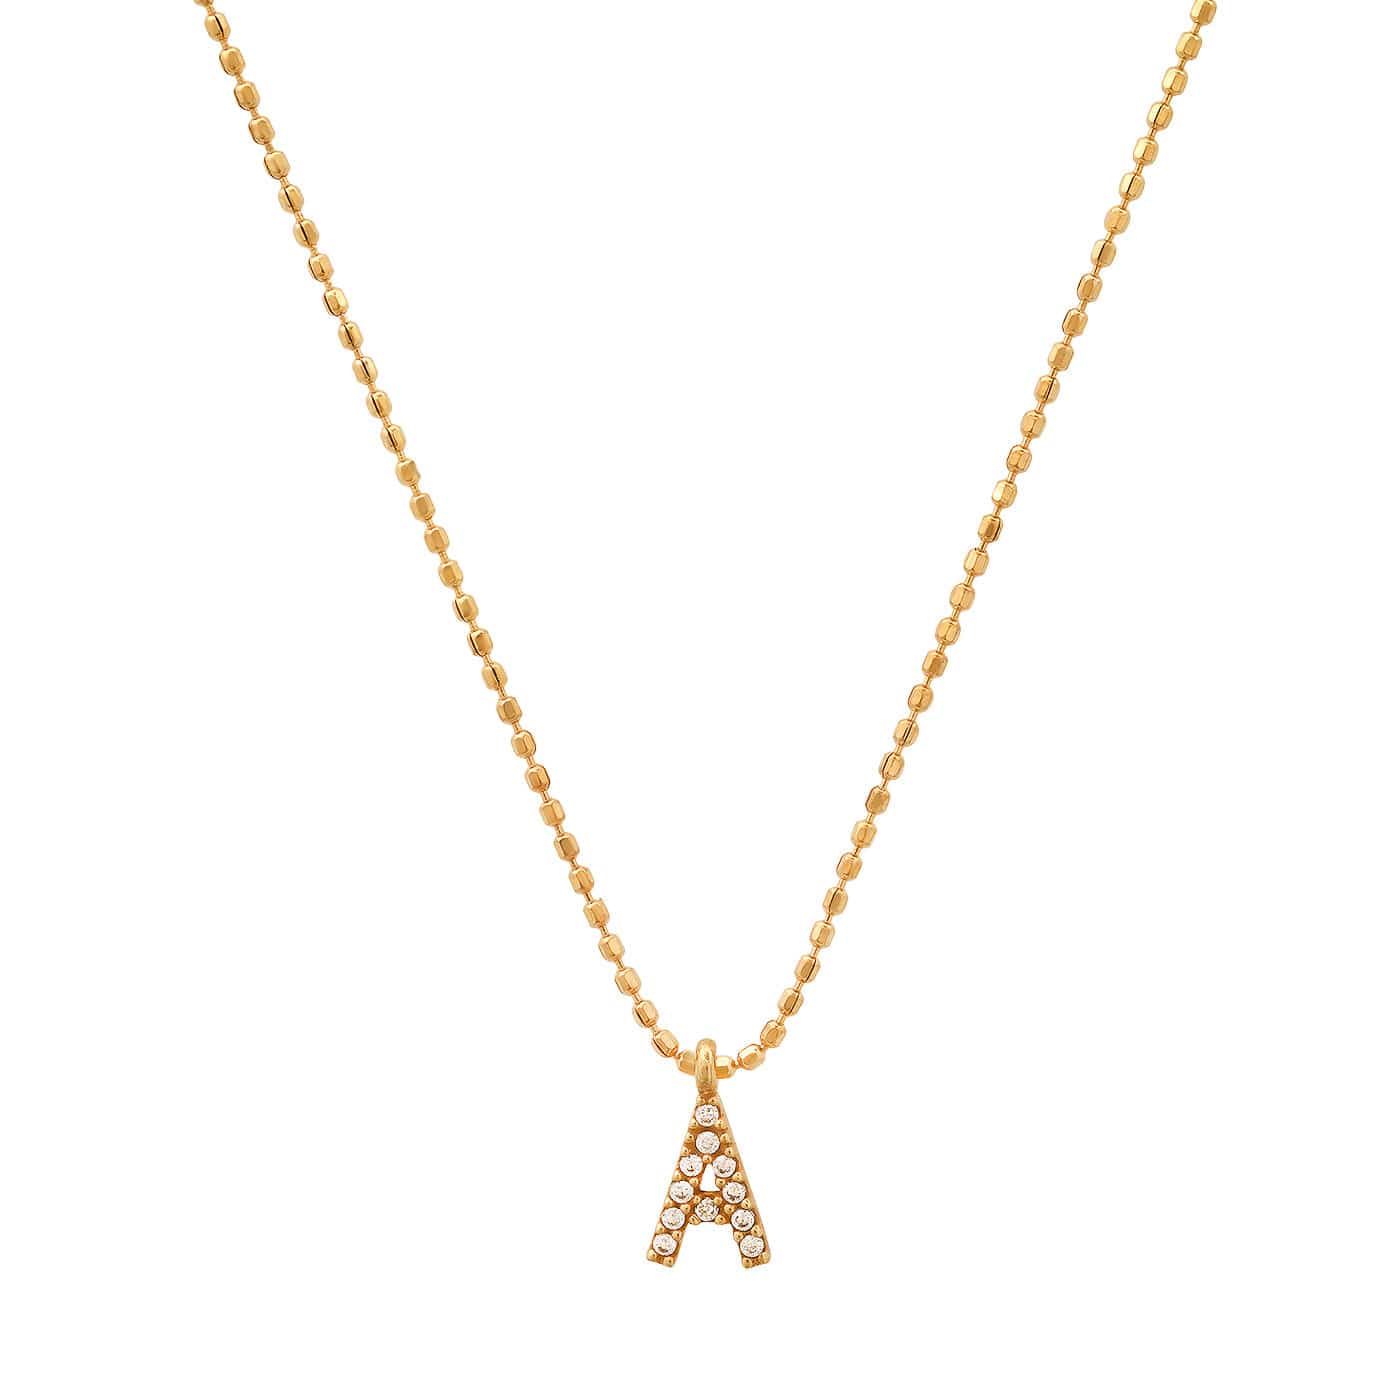 TAI JEWELRY Necklace A Pave Initial Ball Chain Necklace